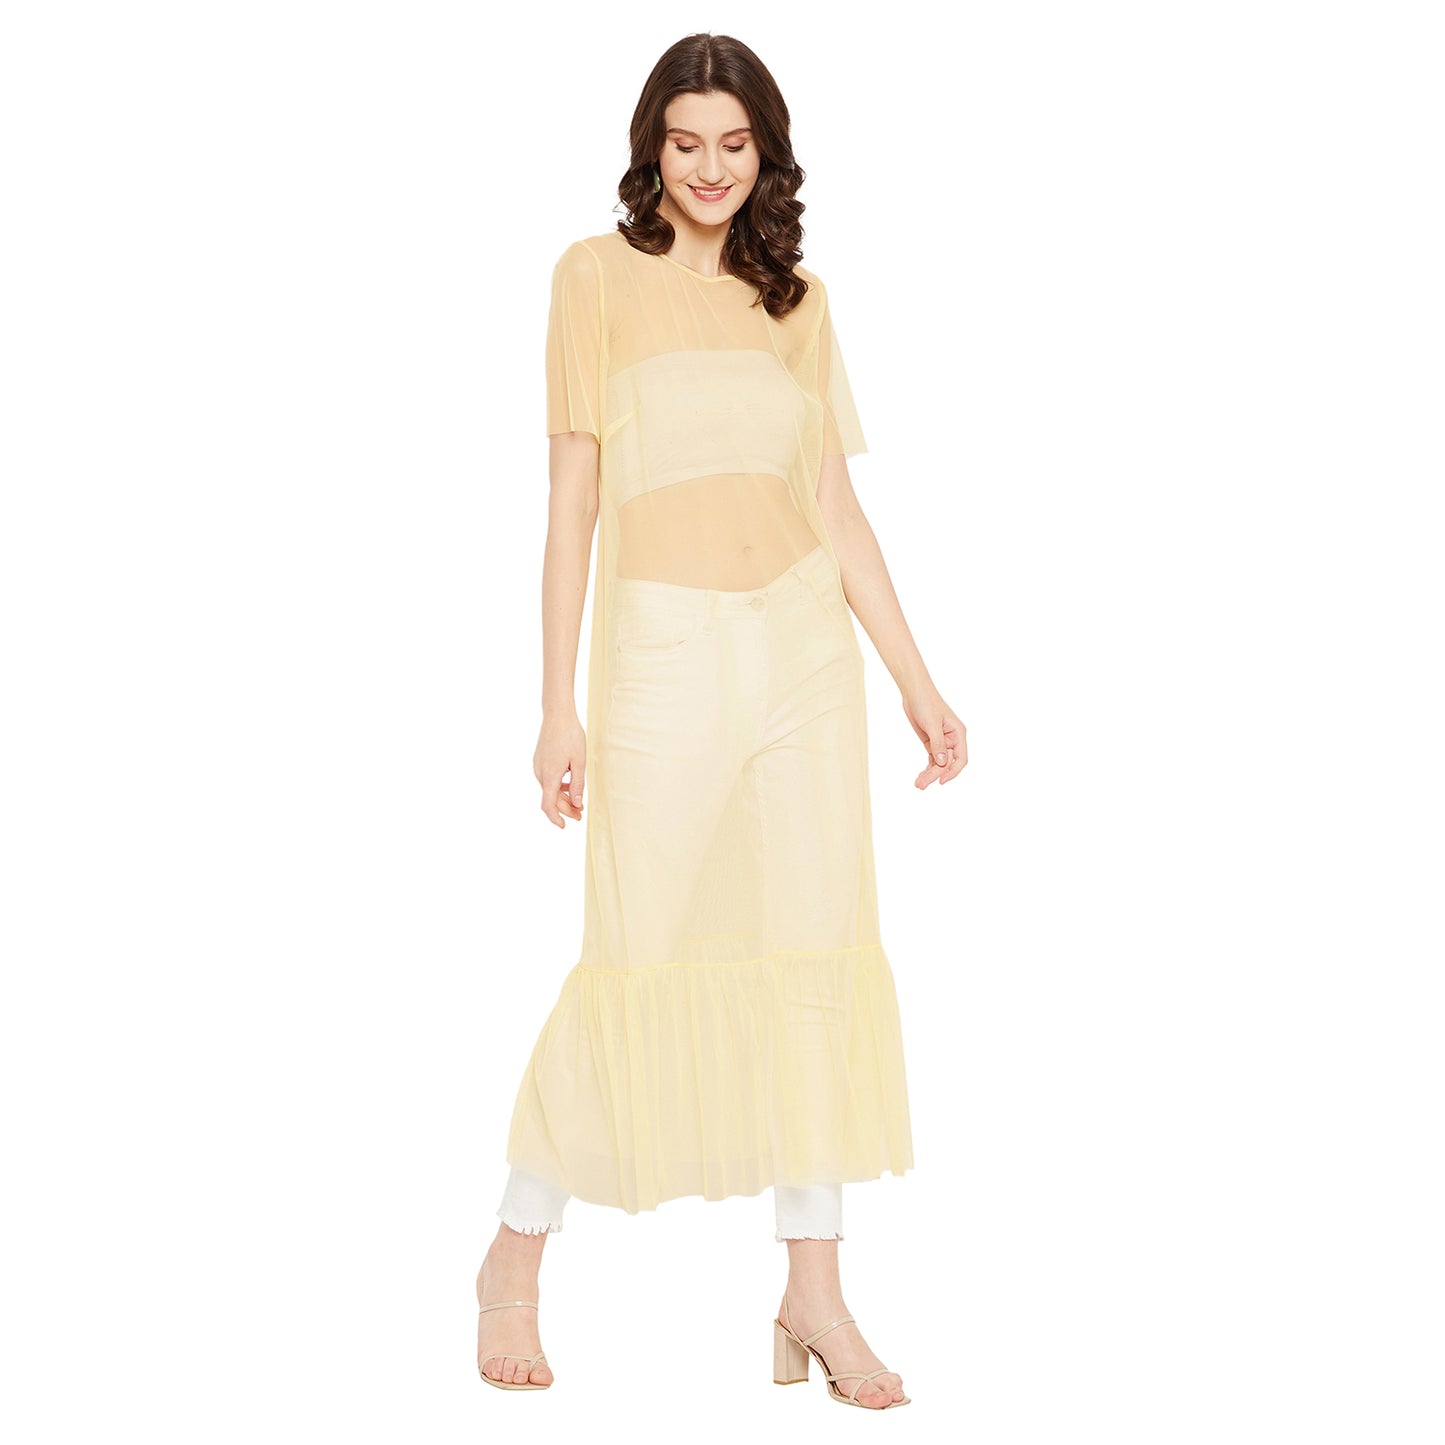 LY2 Sheer yellow Tulle Dress